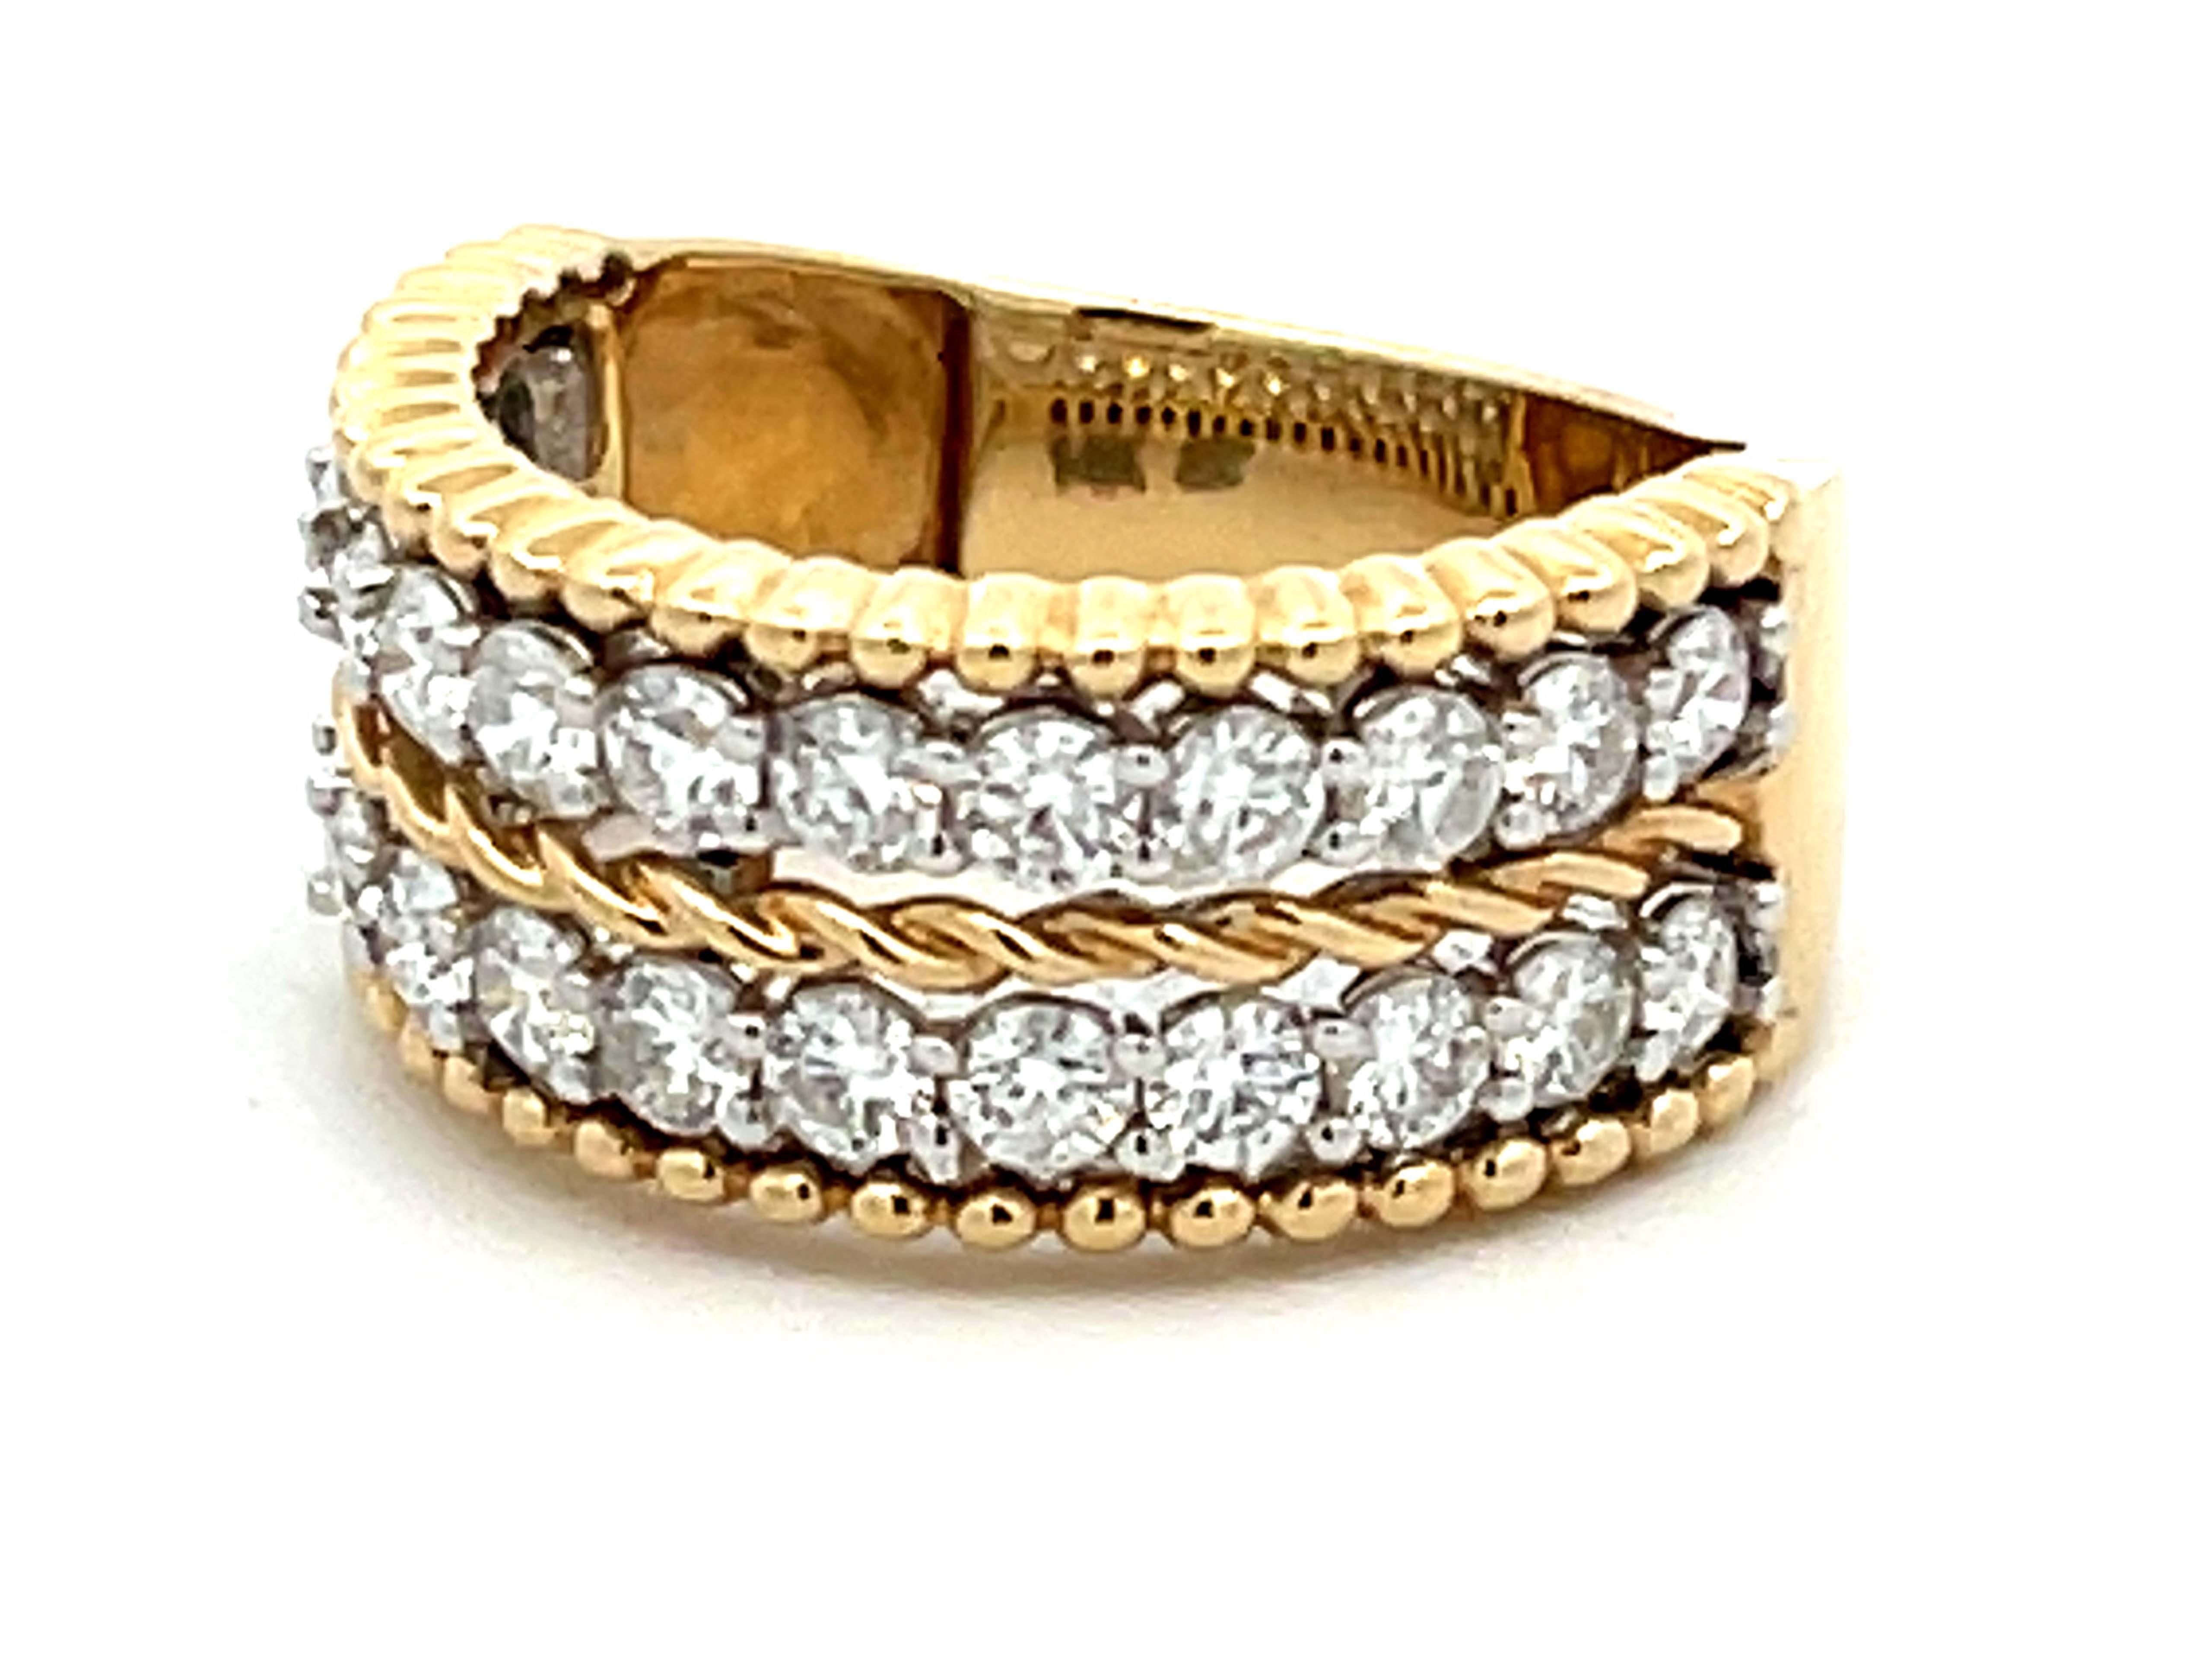 Double Diamond Row Band Ring in 14k Yellow Gold In Excellent Condition For Sale In Honolulu, HI